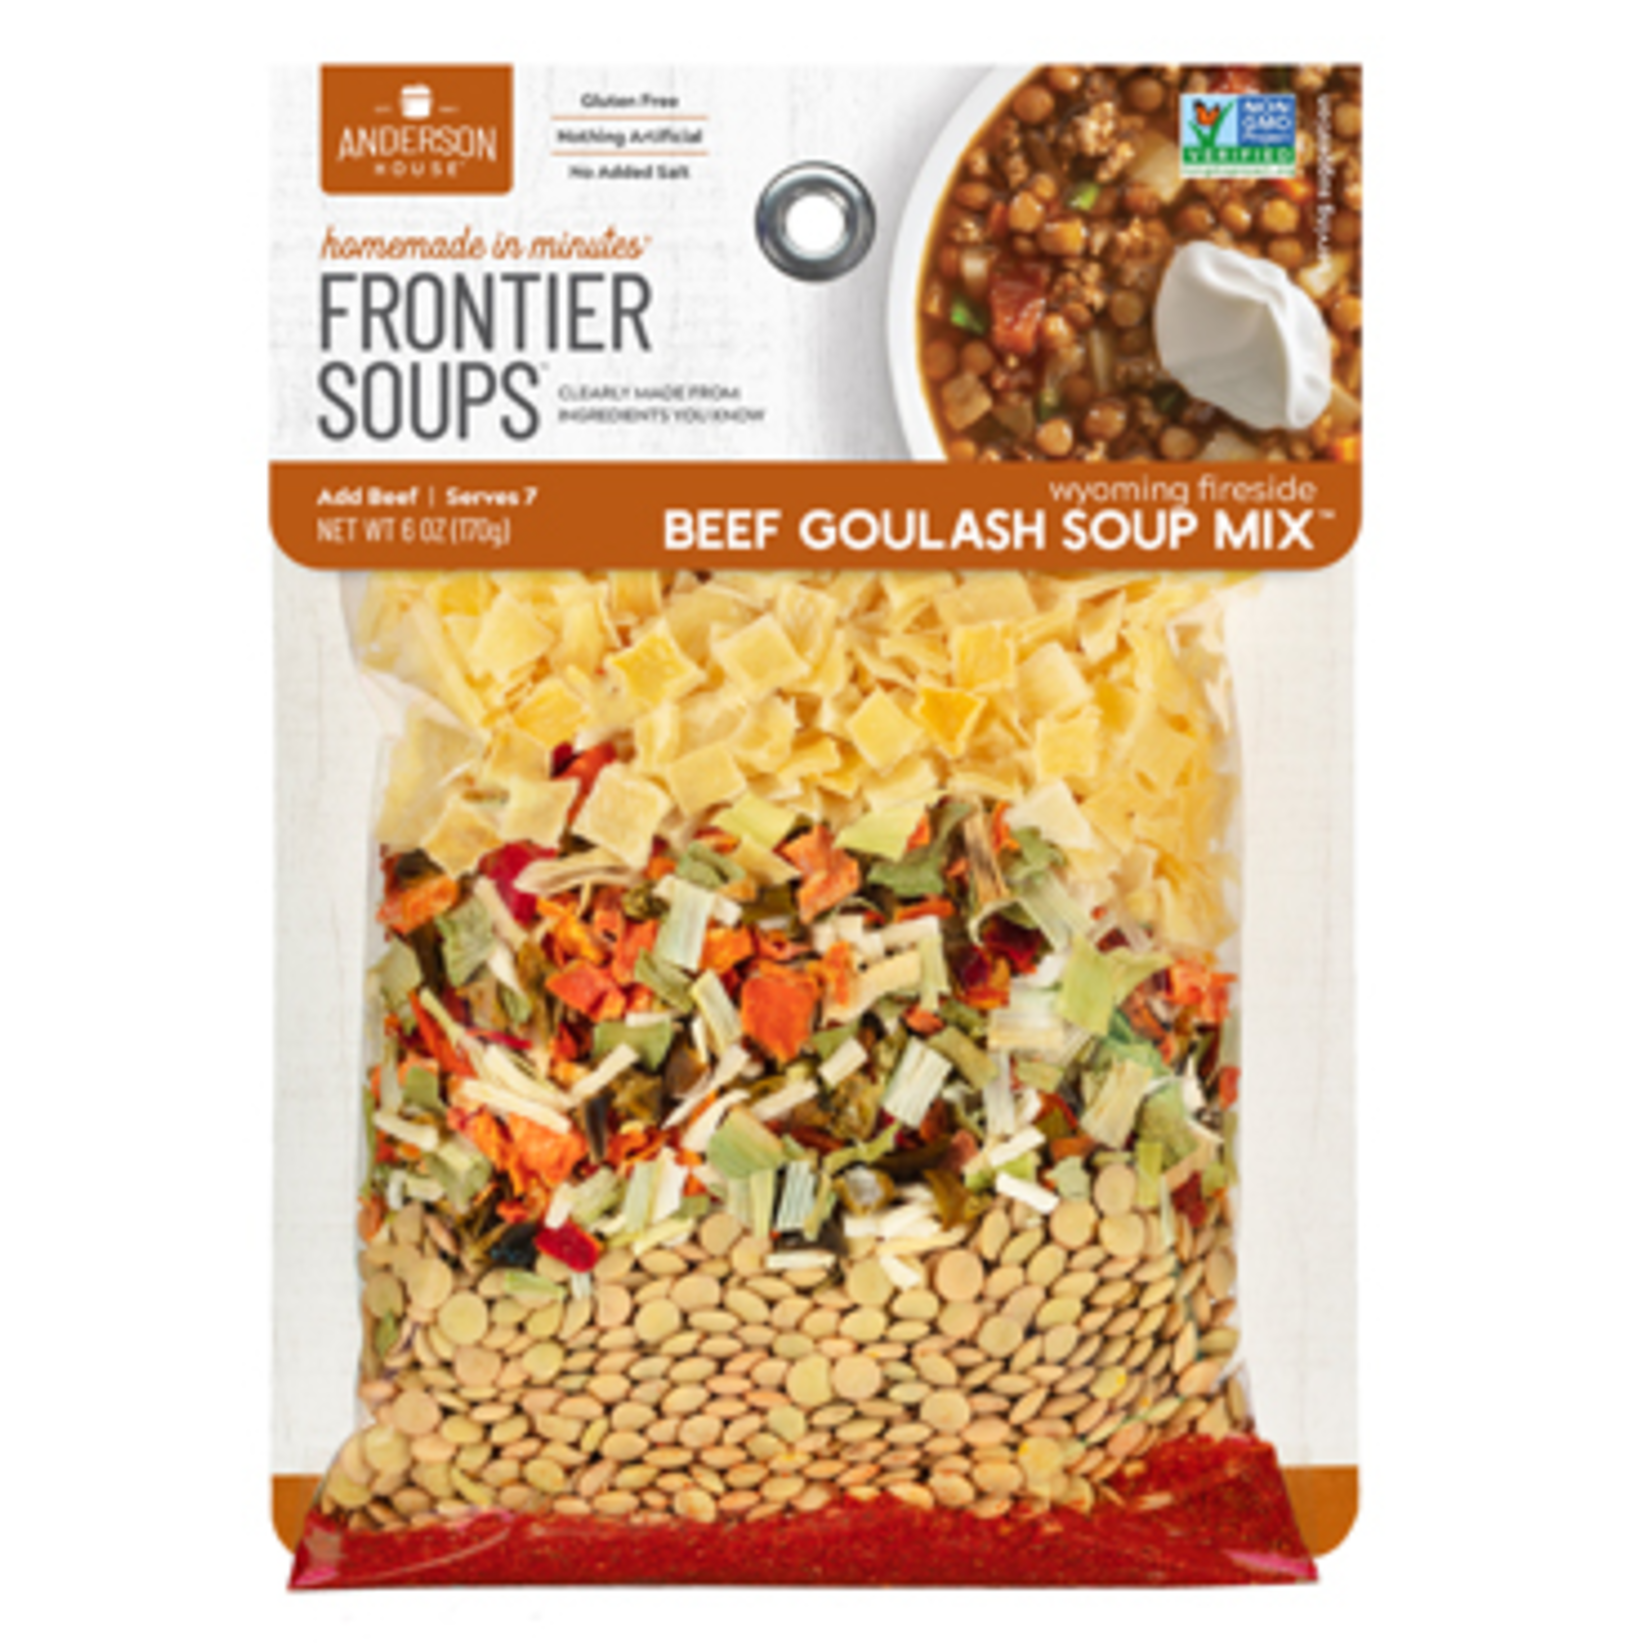 Frontier Soups Wyoming Fireside Beef Goulash Mix